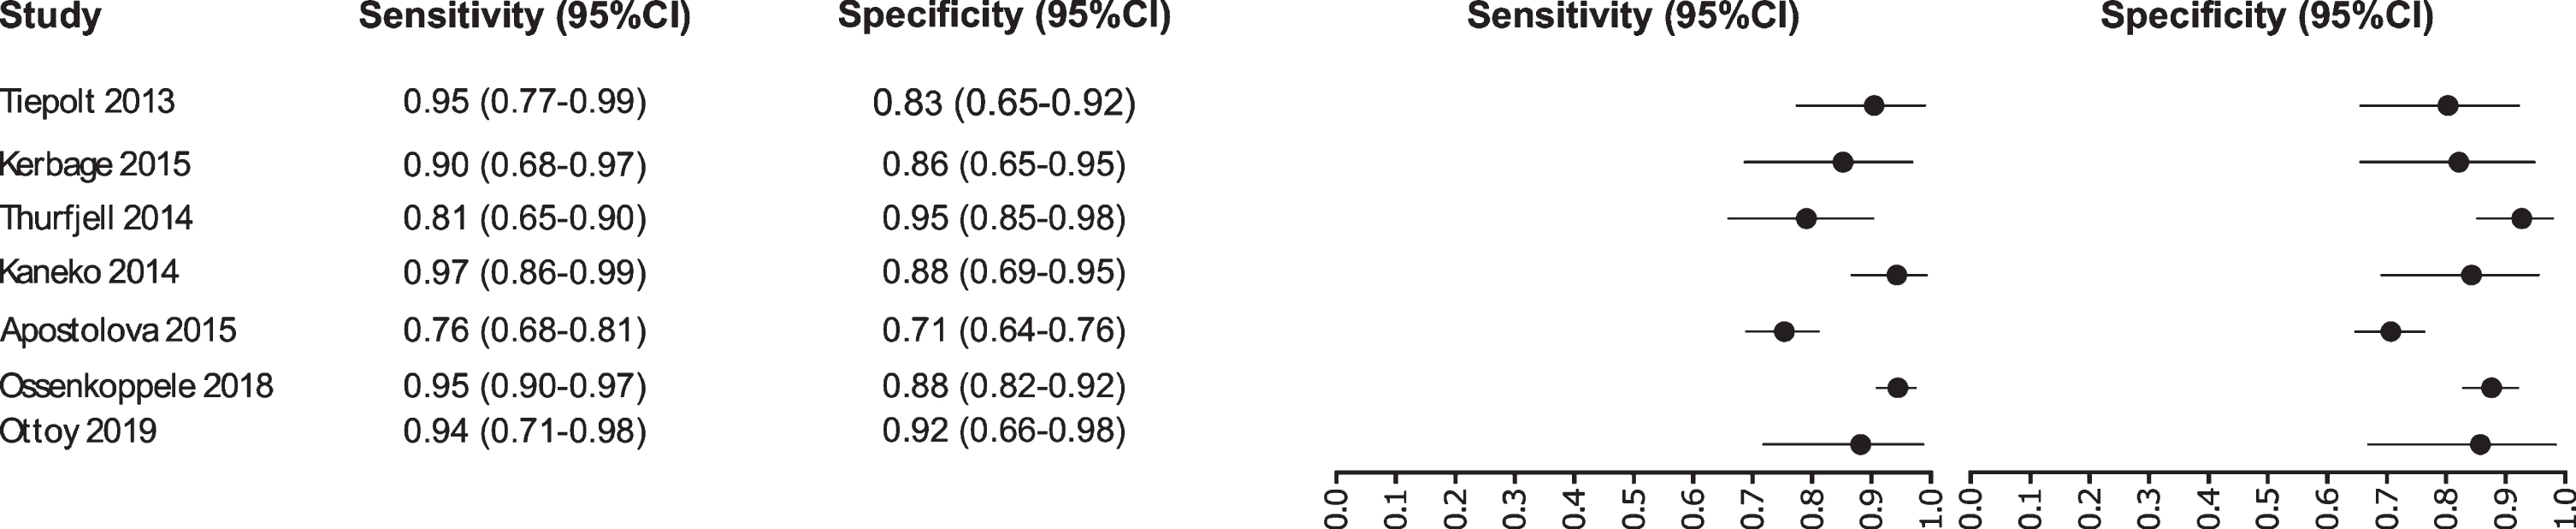 Study data and paired forest plot of the sensitivity and specificity of EEG in Alzheimer’s disease diagnosis. Data from each study are summarized. Sensitivity and specificity are reported with a mean (95% confidence limits). Forest plot depicts the estimated sensitivity and specificity (black circles) and its 95% confidence limits (horizontal black line).